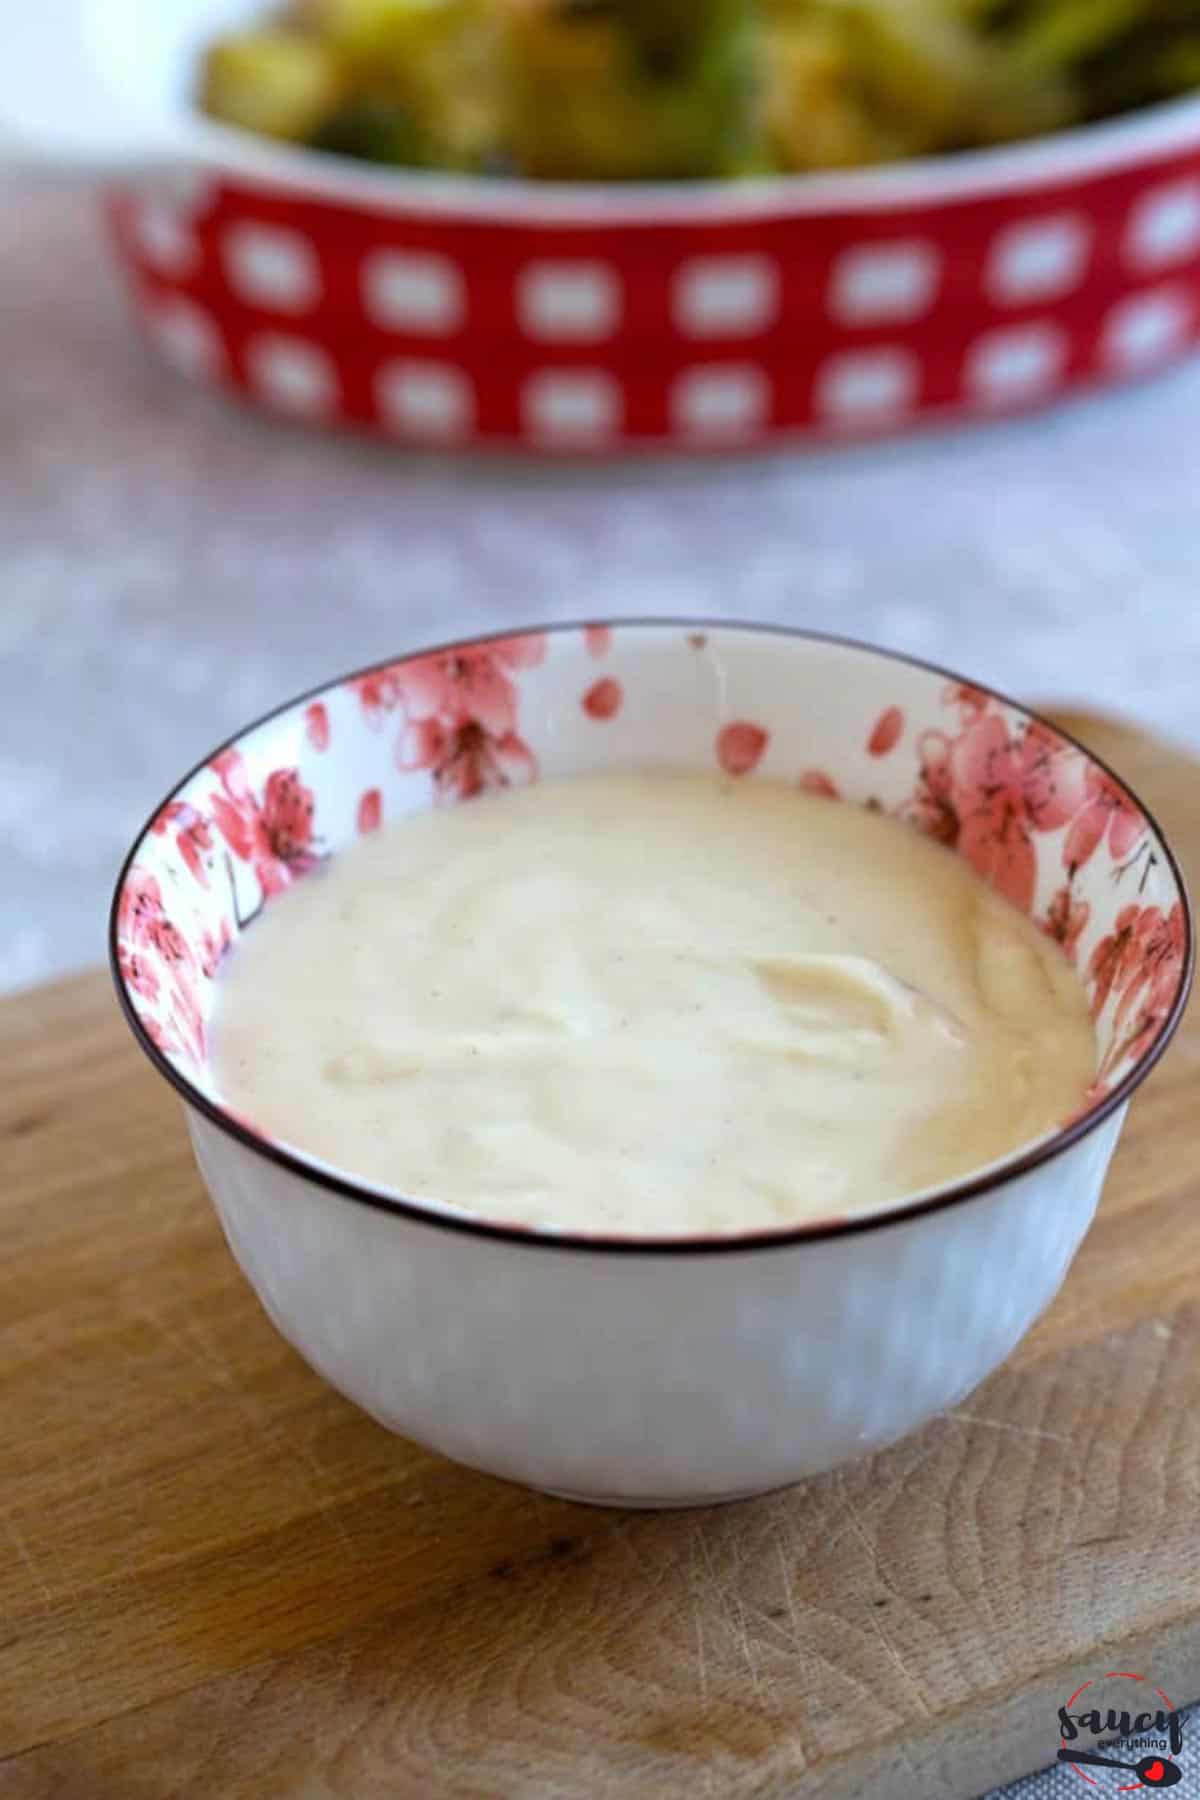 Cheese sauce in a red and white bowl